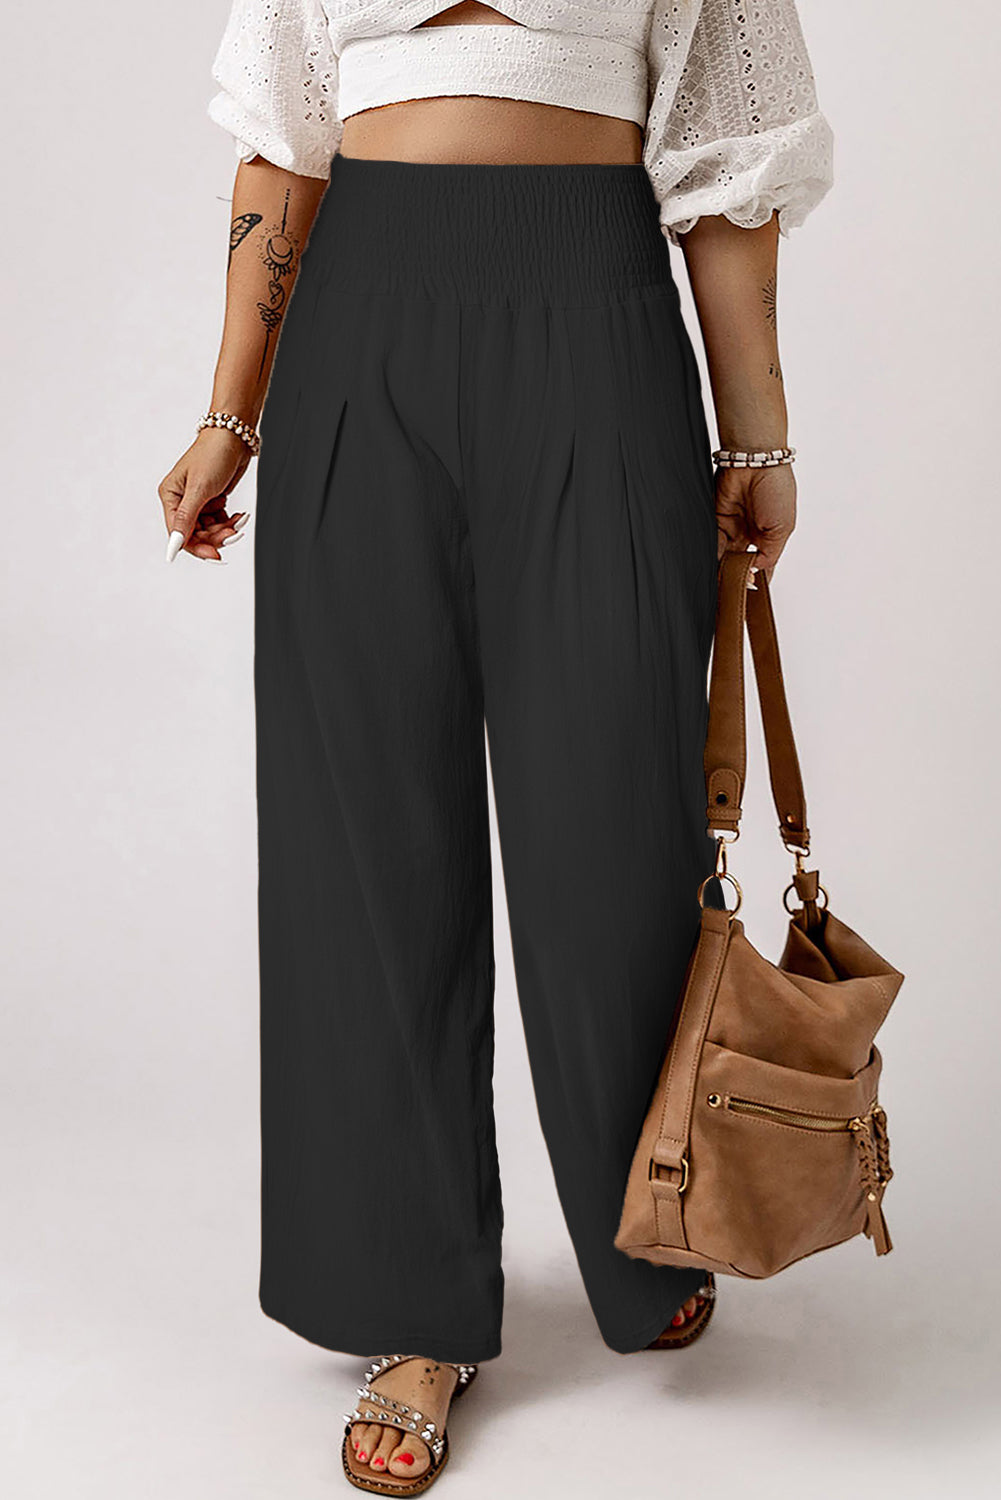 Lecce Wide Leg Pleated Trouser Pants in Tan, White, or Black